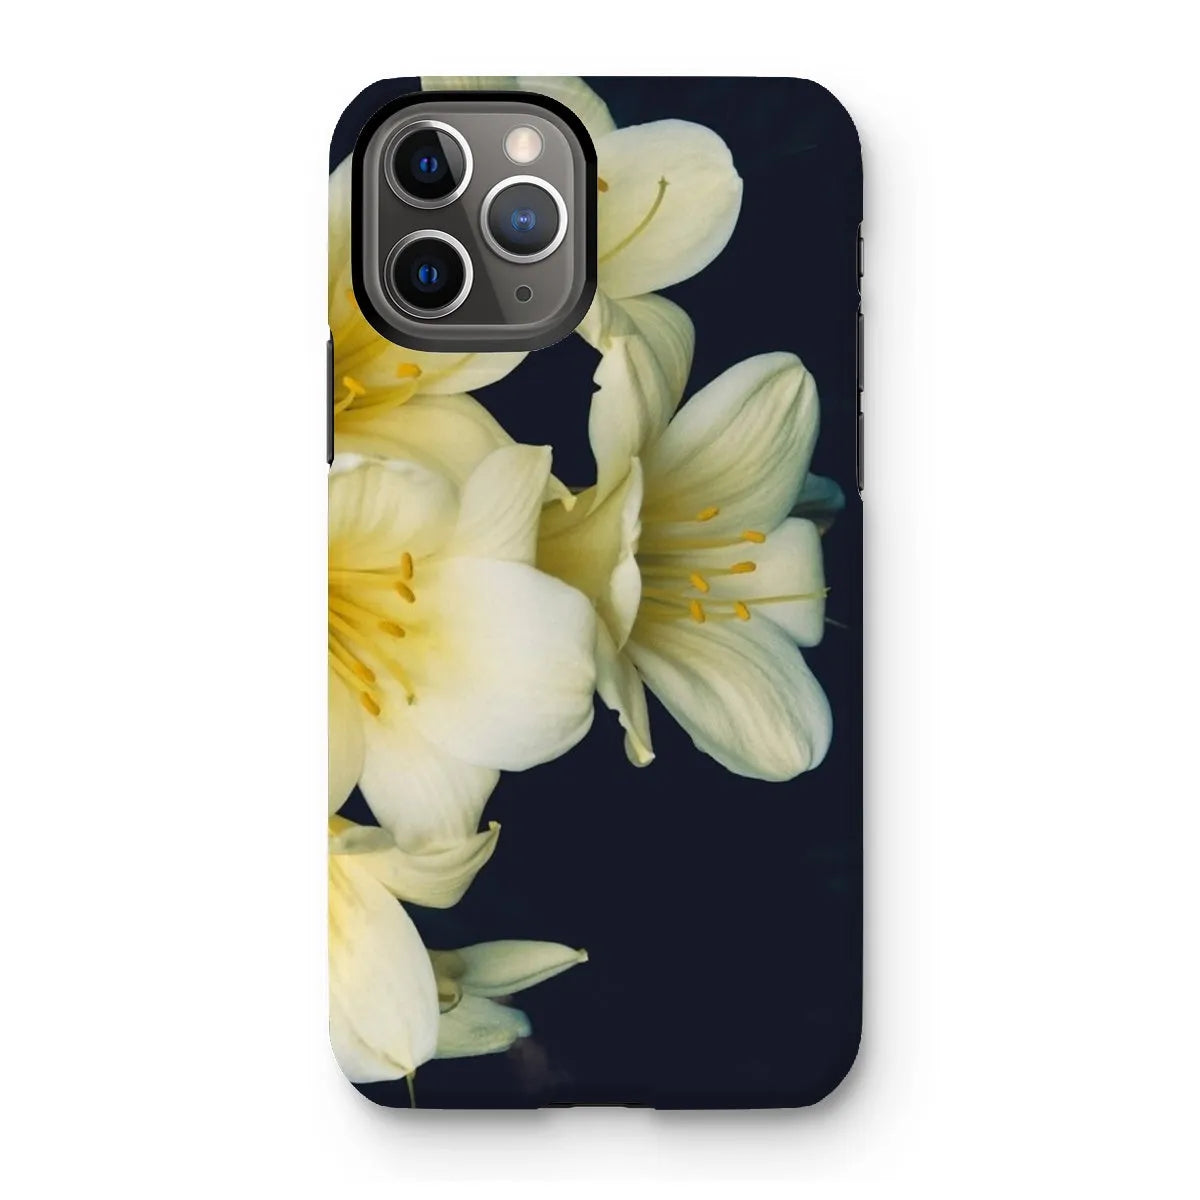 Flower Power Too Tough Phone Case - Iphone 11 Pro / Matte - Mobile Phone Cases - Aesthetic Art